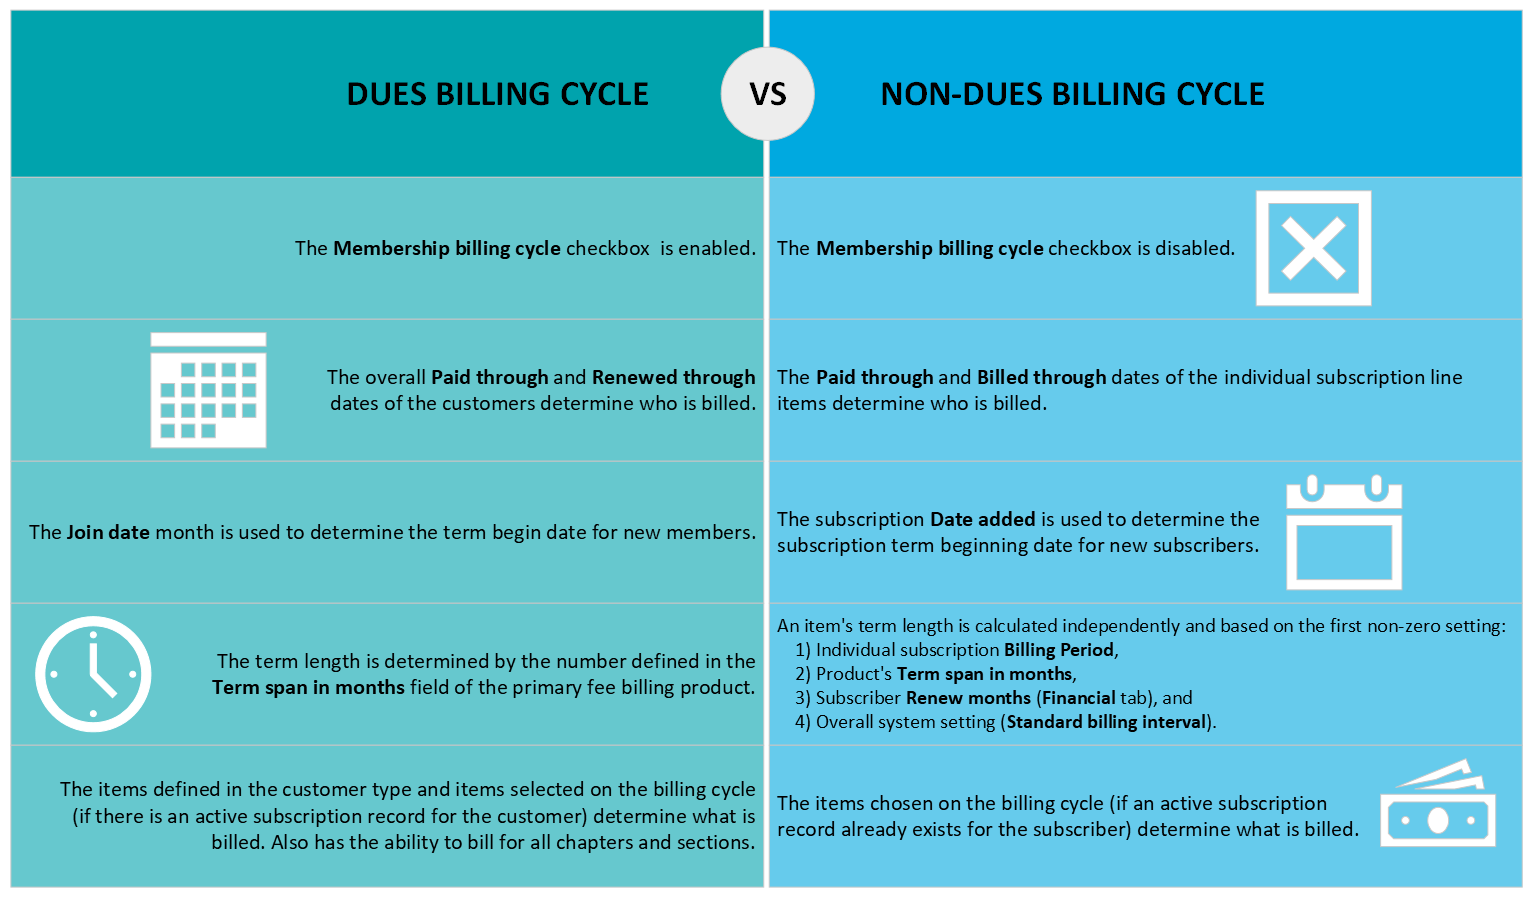 Dues billing cycle versus non dues billing cycle